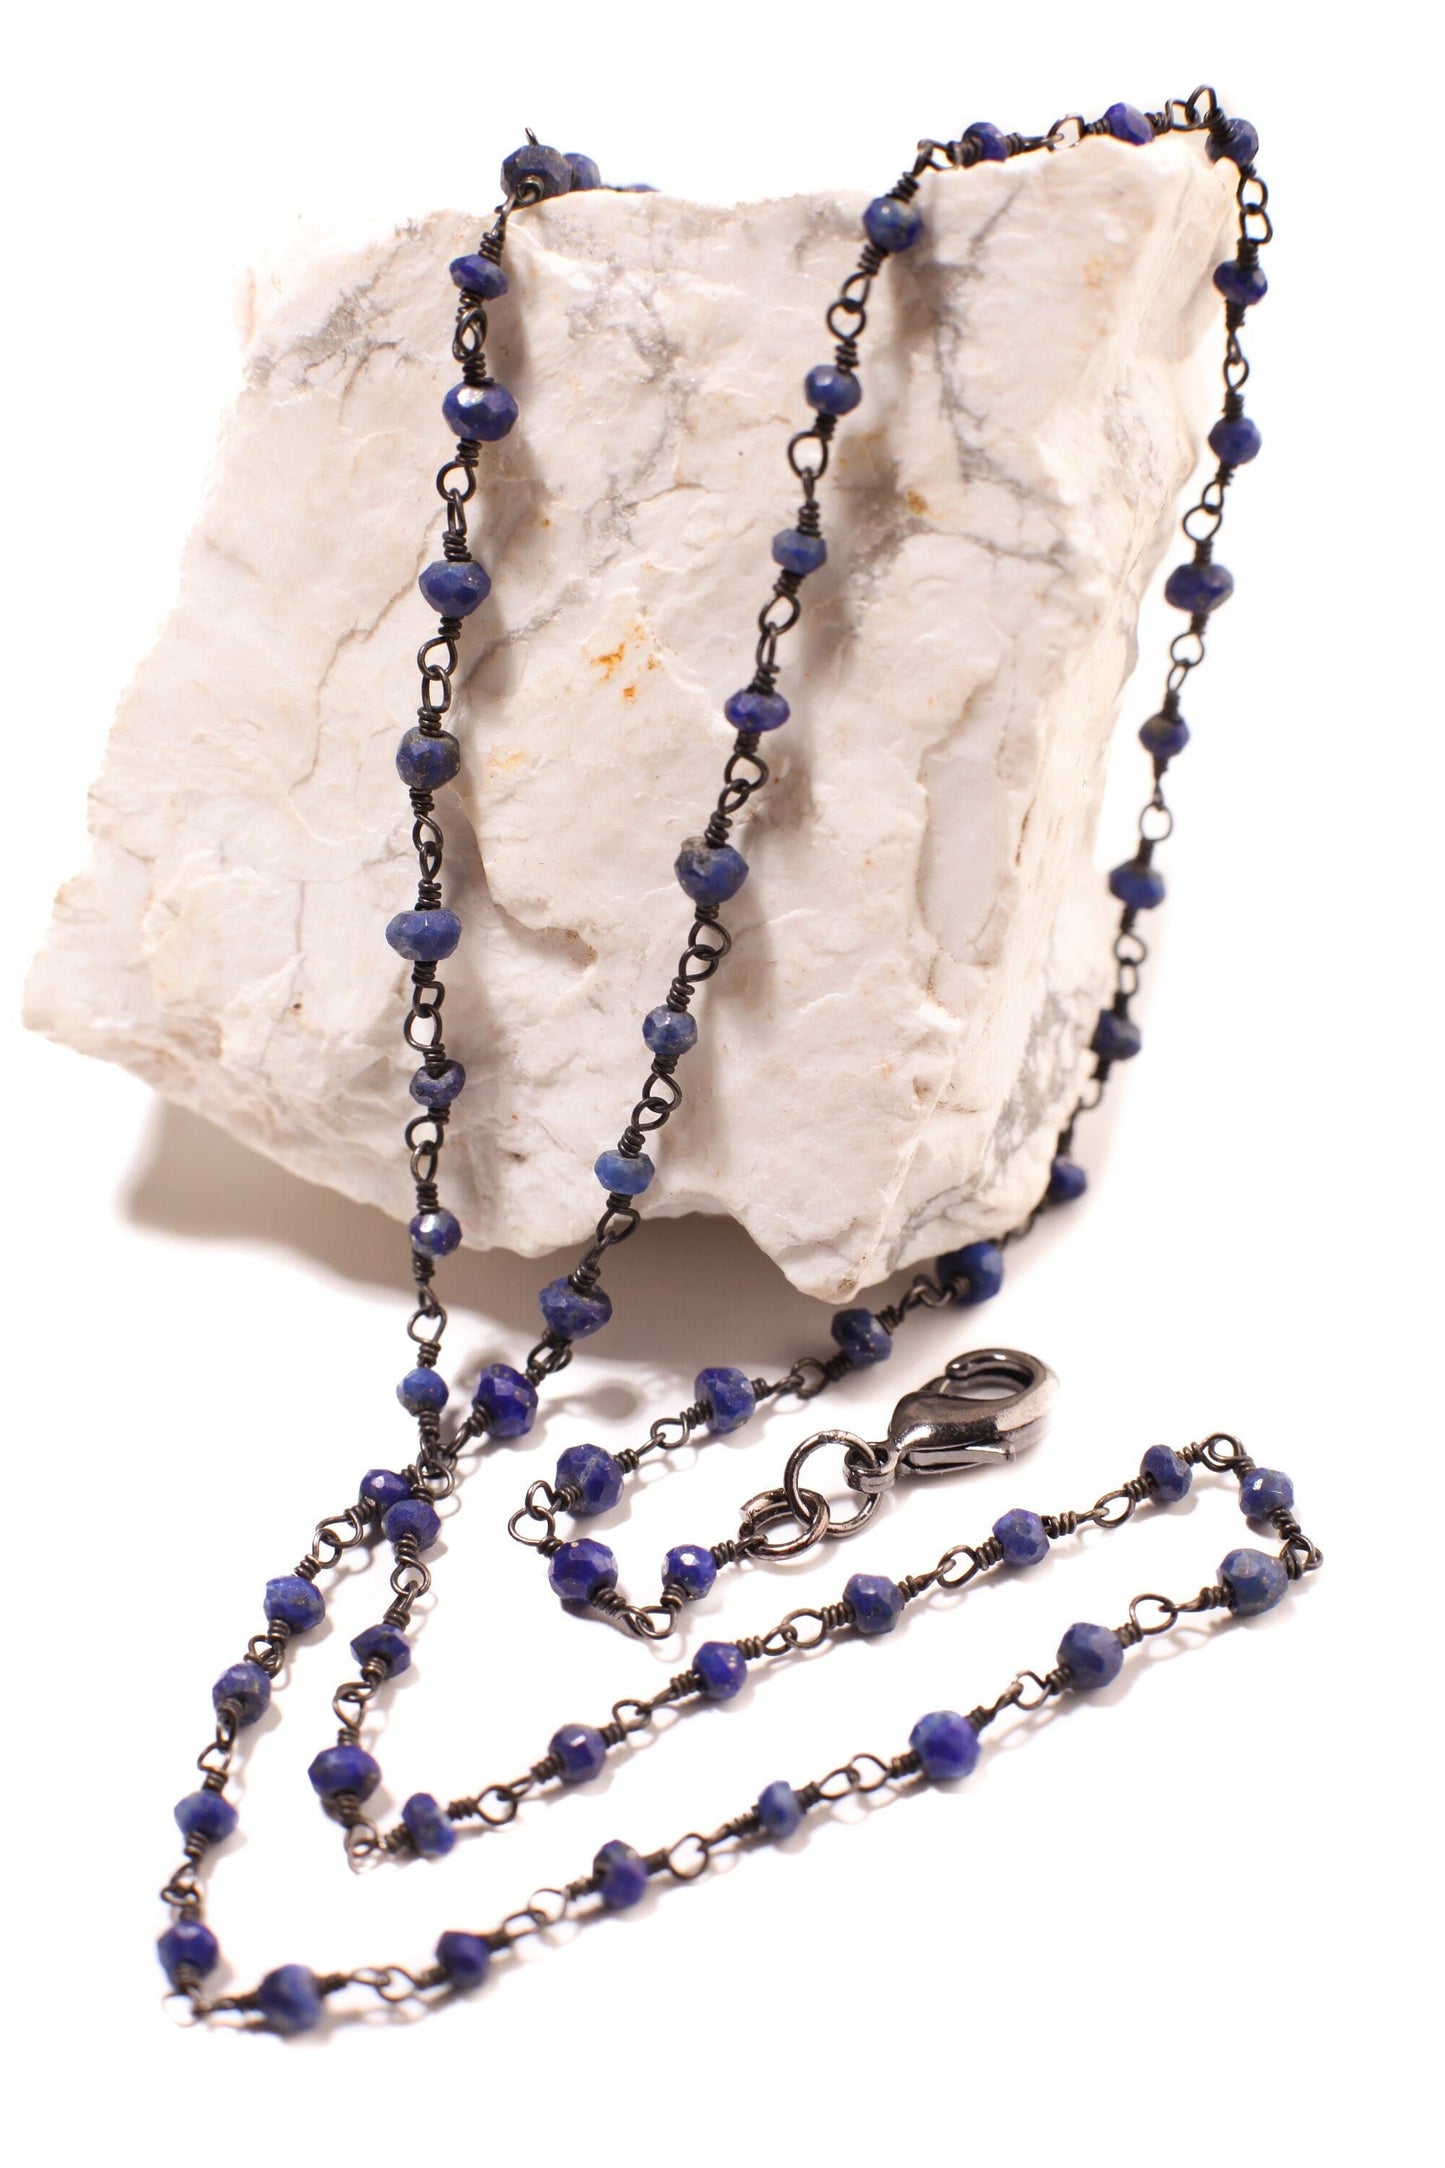 Afghanistan Lapis dark blue Oxidized silver Faceted Natural Precious Gemstone Chain High Quality layering Finished Necklace with Clasp